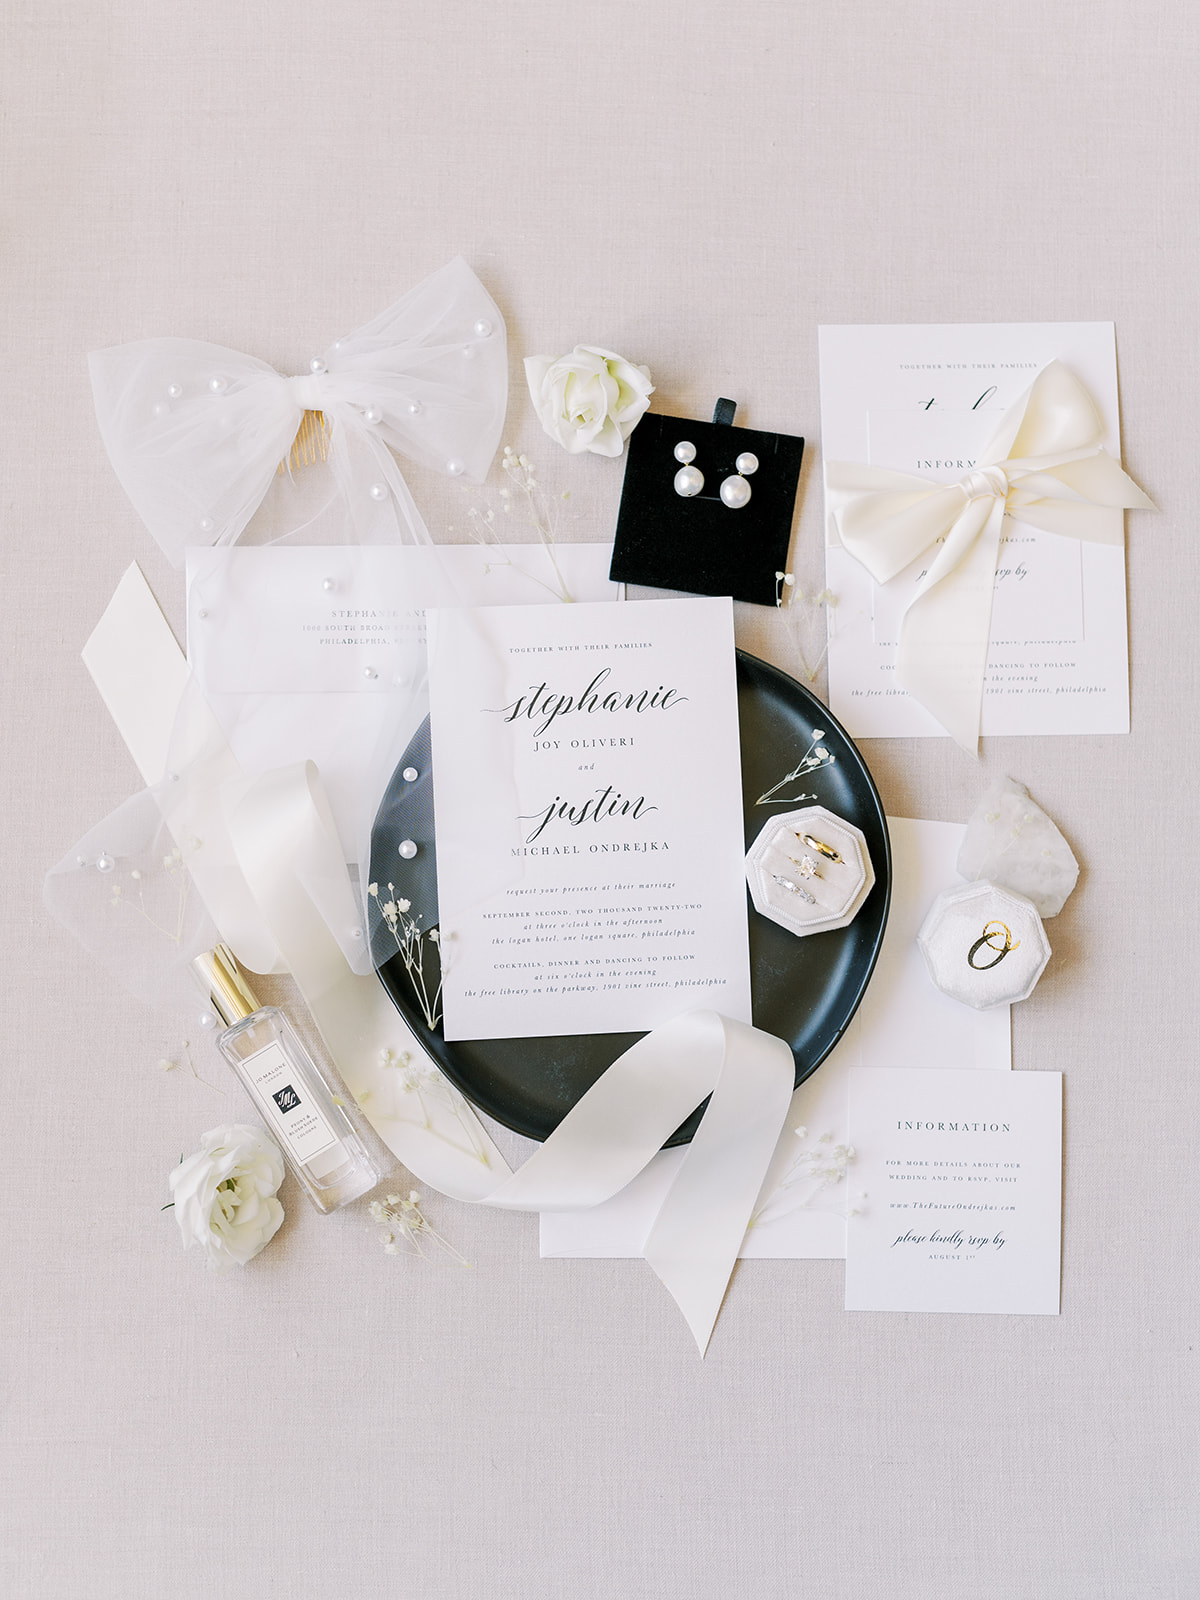 white and black wedding invitations laid out on linen with pearl accents